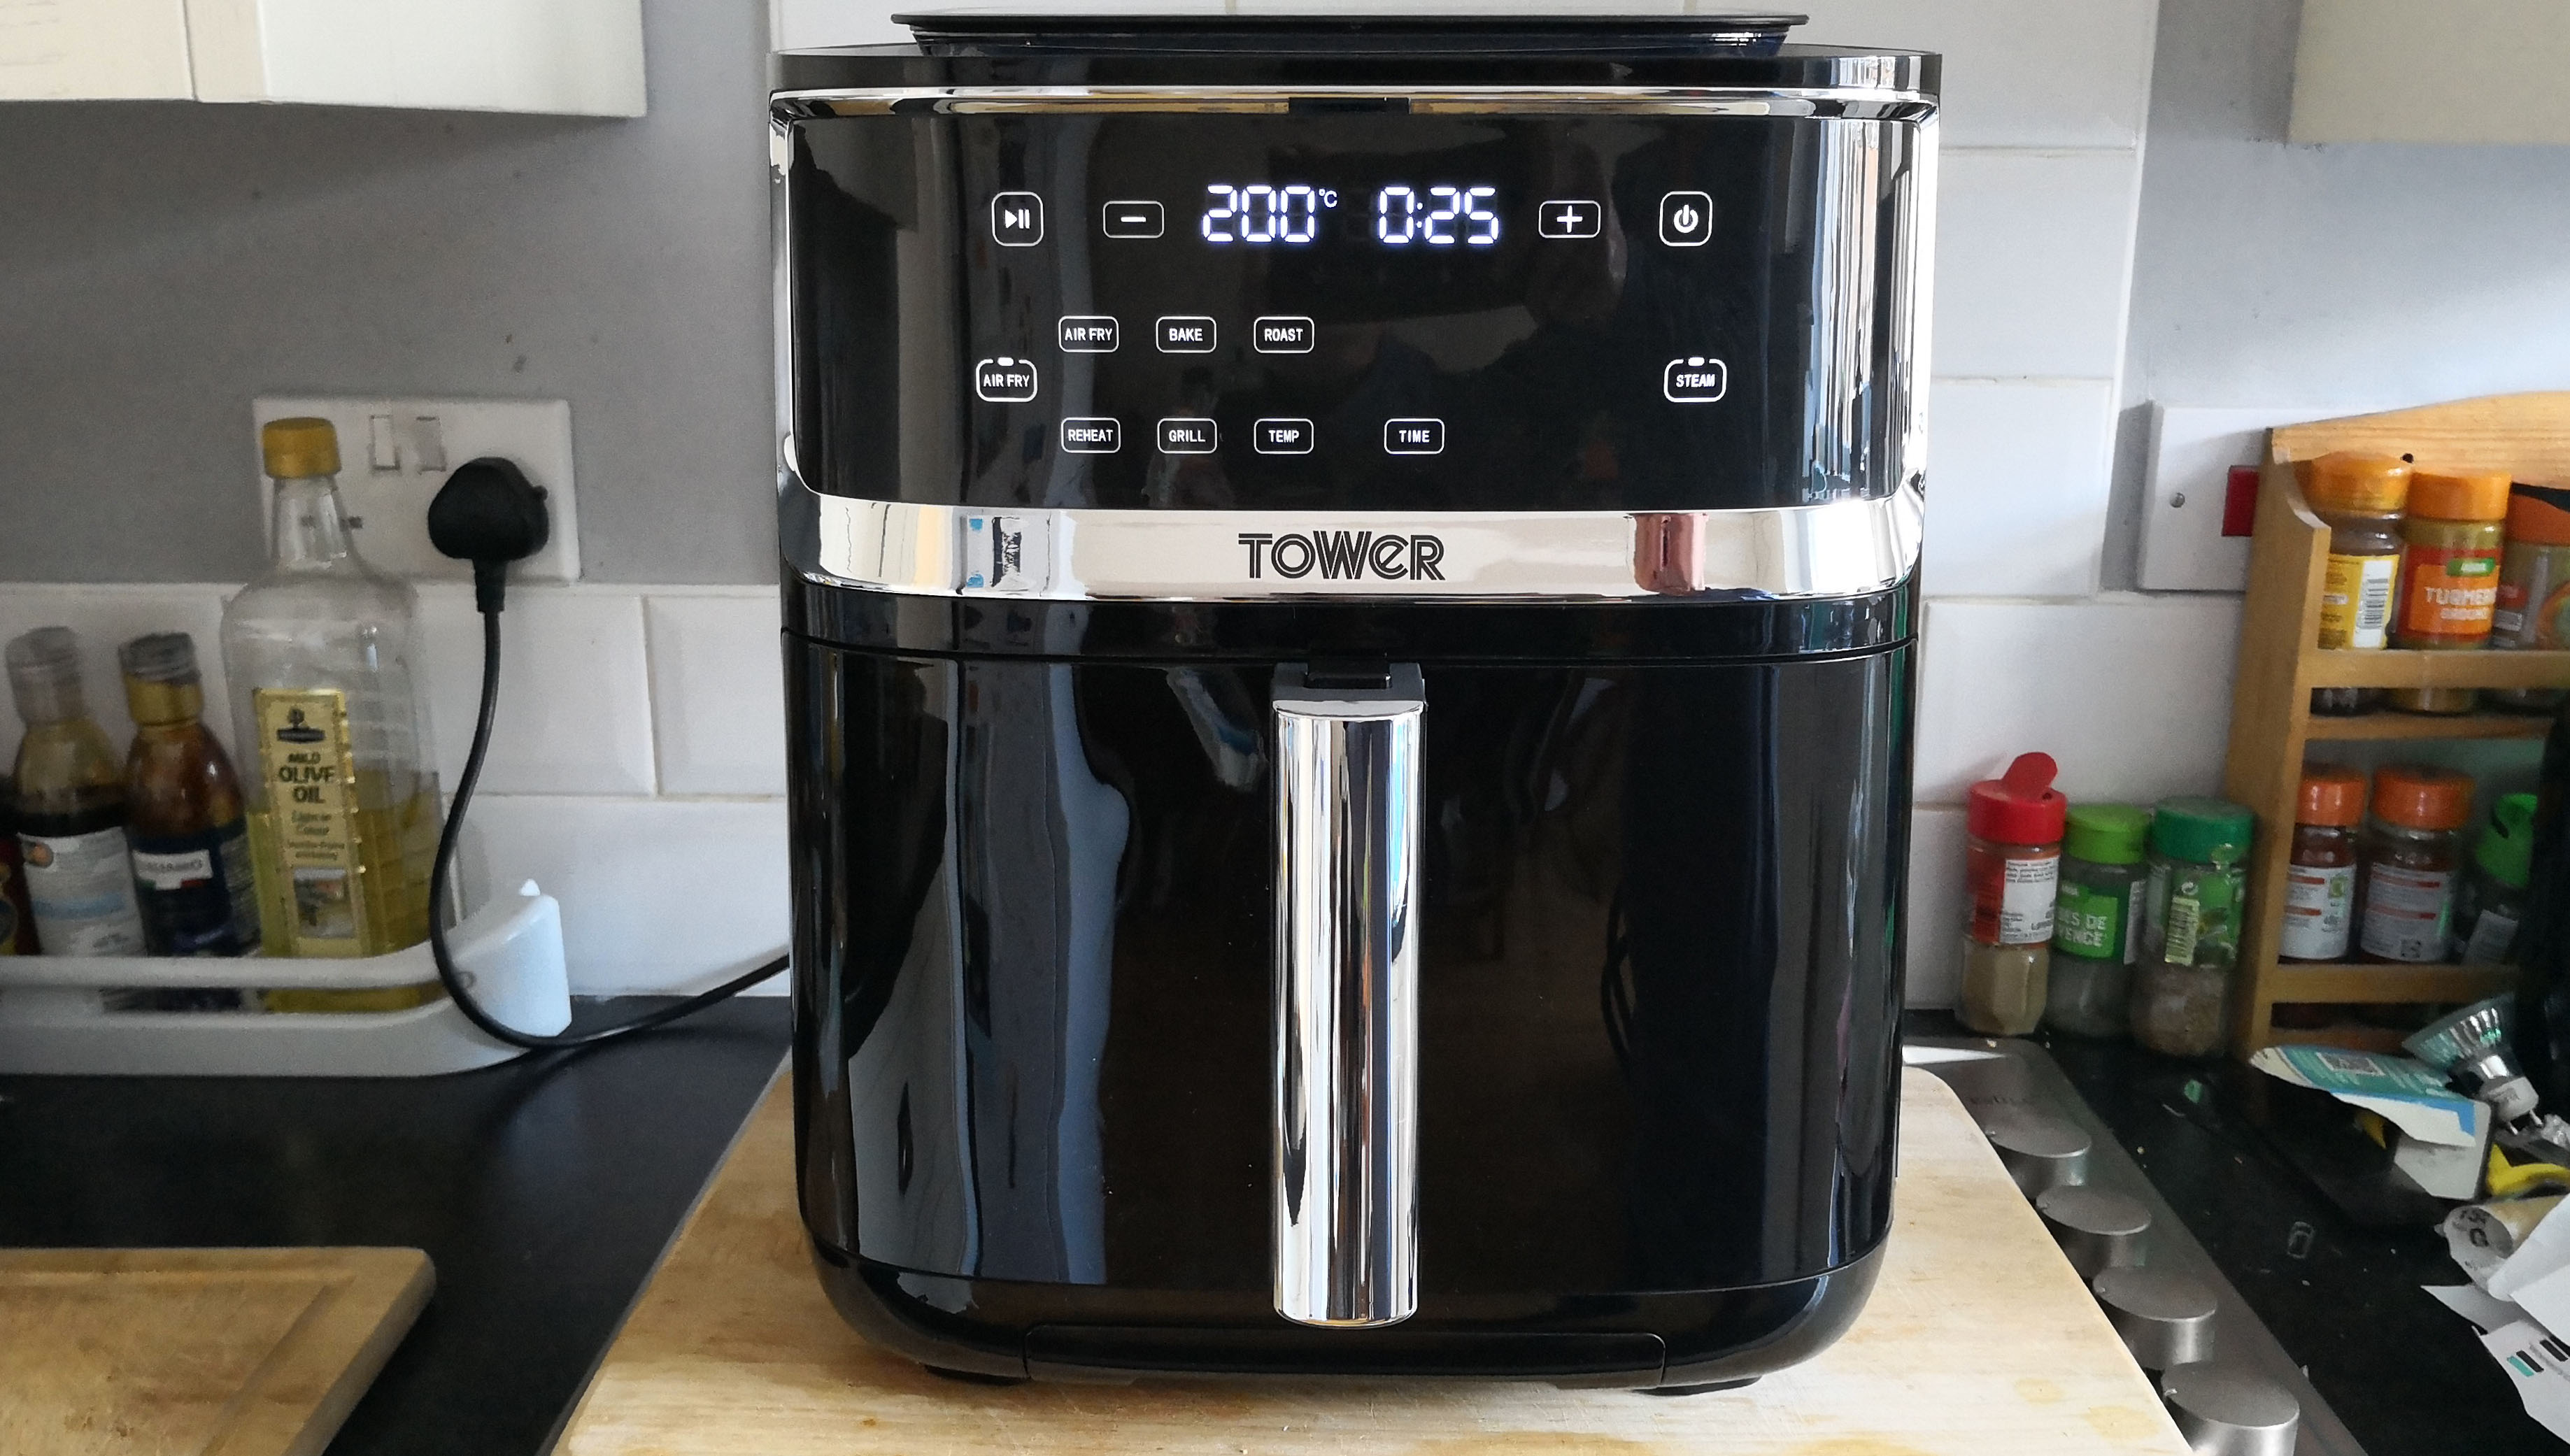 Tefal Actifry Genius XL 2in1 review: brilliant and massive air fryer that's  also a pressure cooker